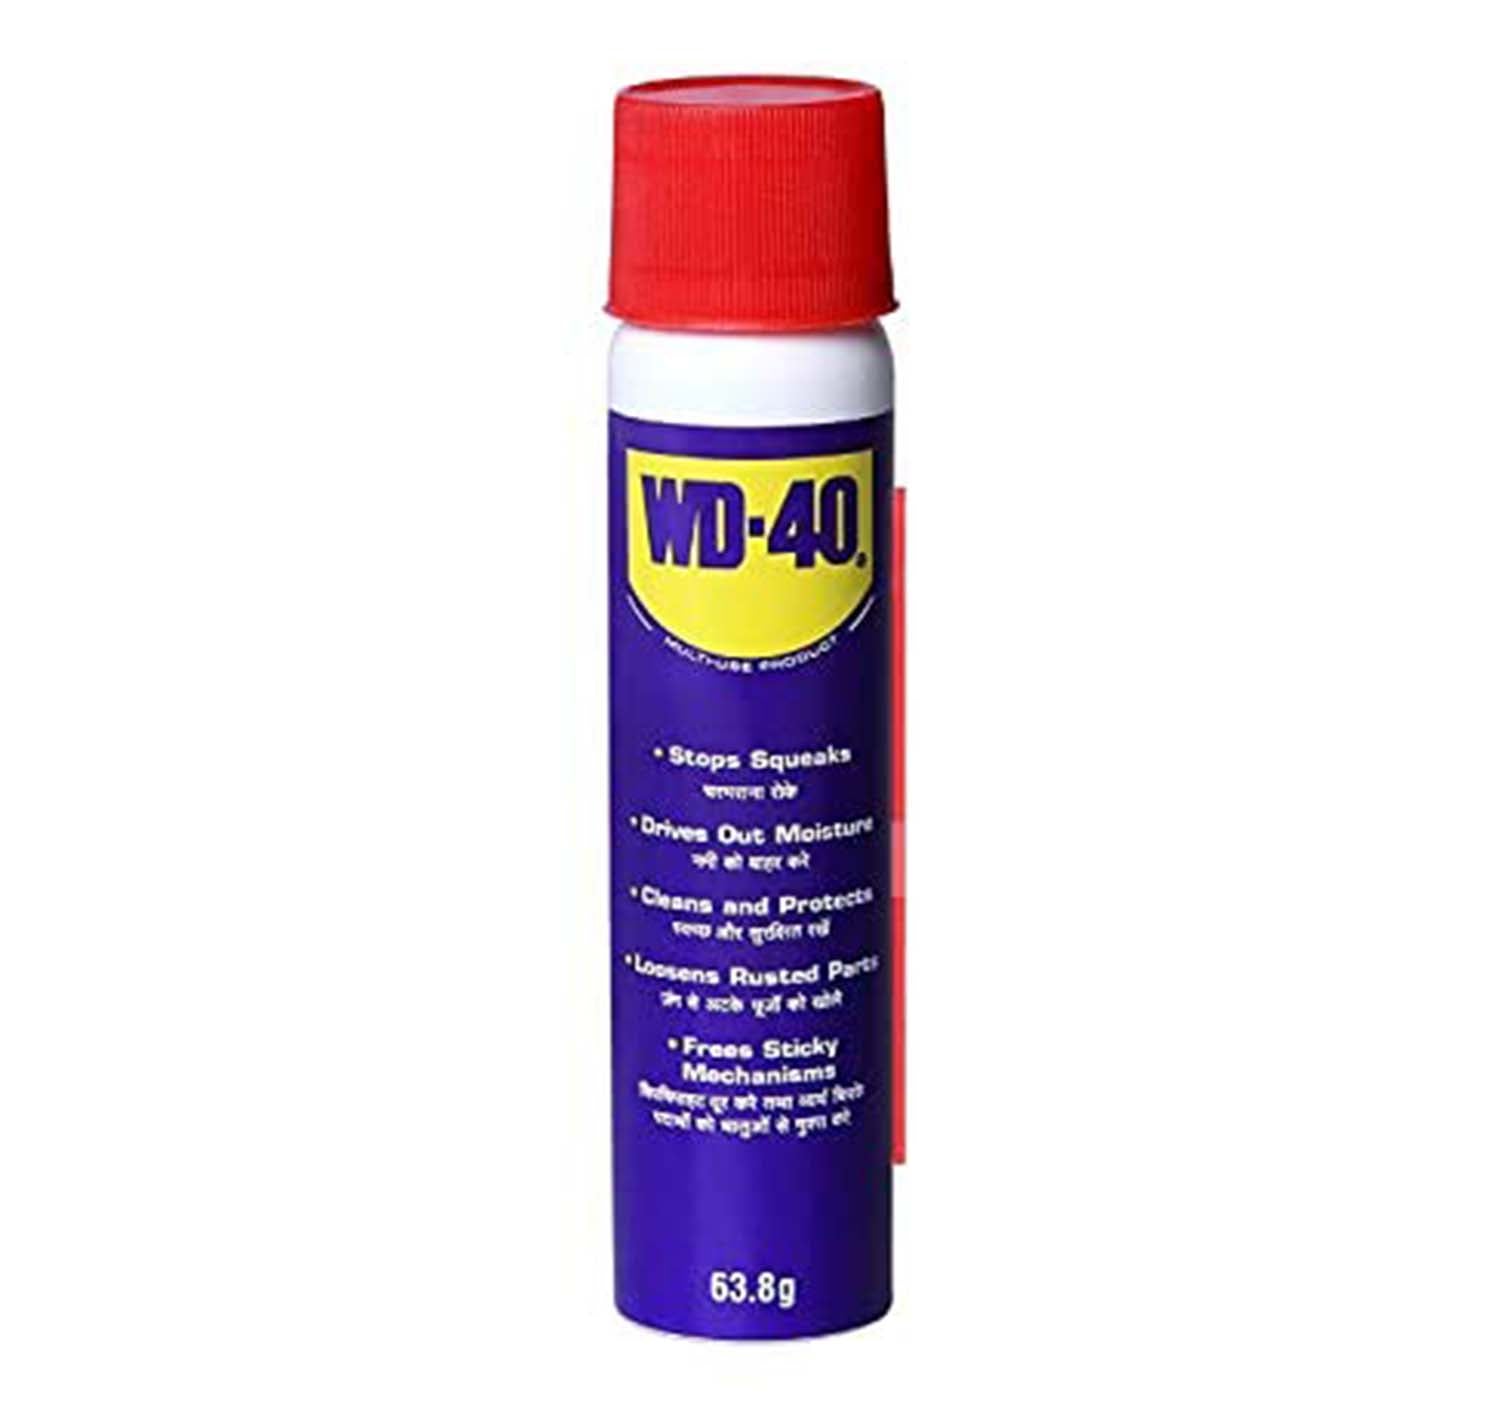 WD 40 WD-40 Lubricant, Degreaser And Rust Remover